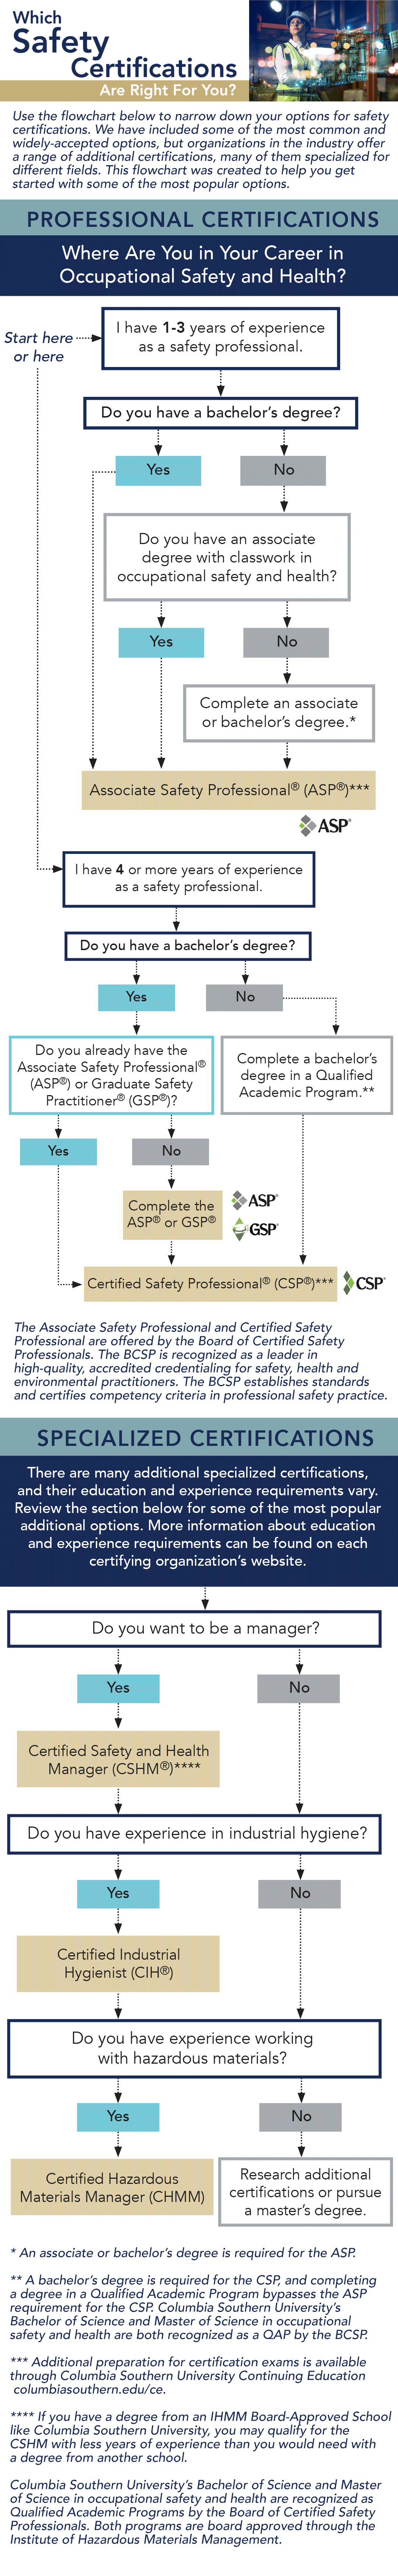 Flowchart to determine which safety certifications are right for you